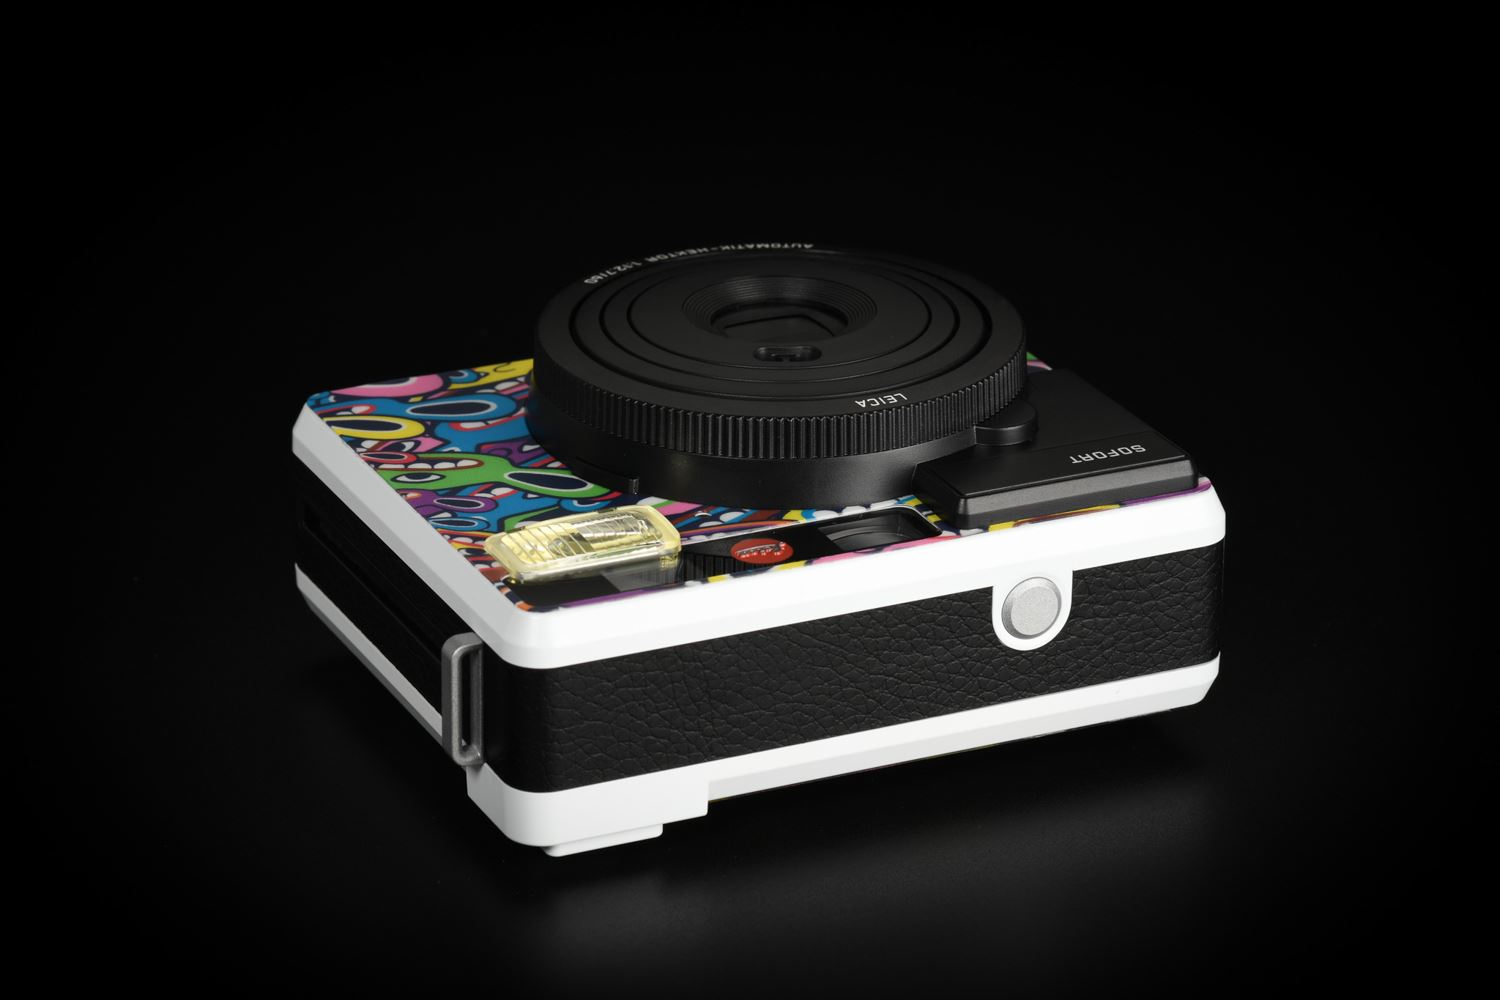 Picture of Leica Sofort Instant Camera Limoland Special Edition